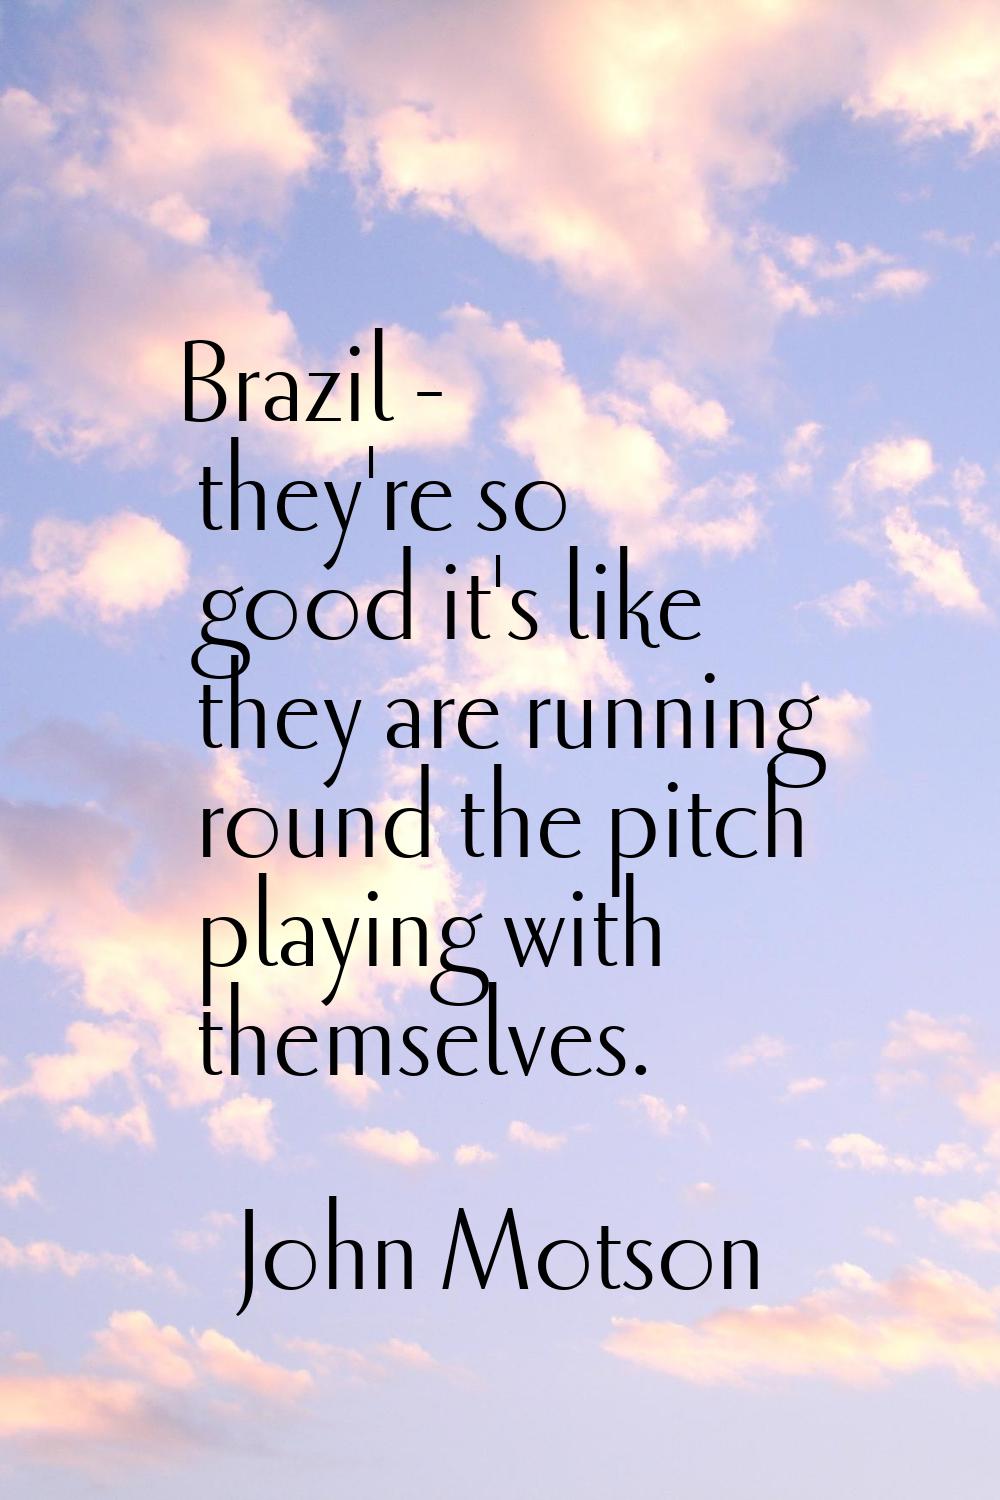 Brazil - they're so good it's like they are running round the pitch playing with themselves.